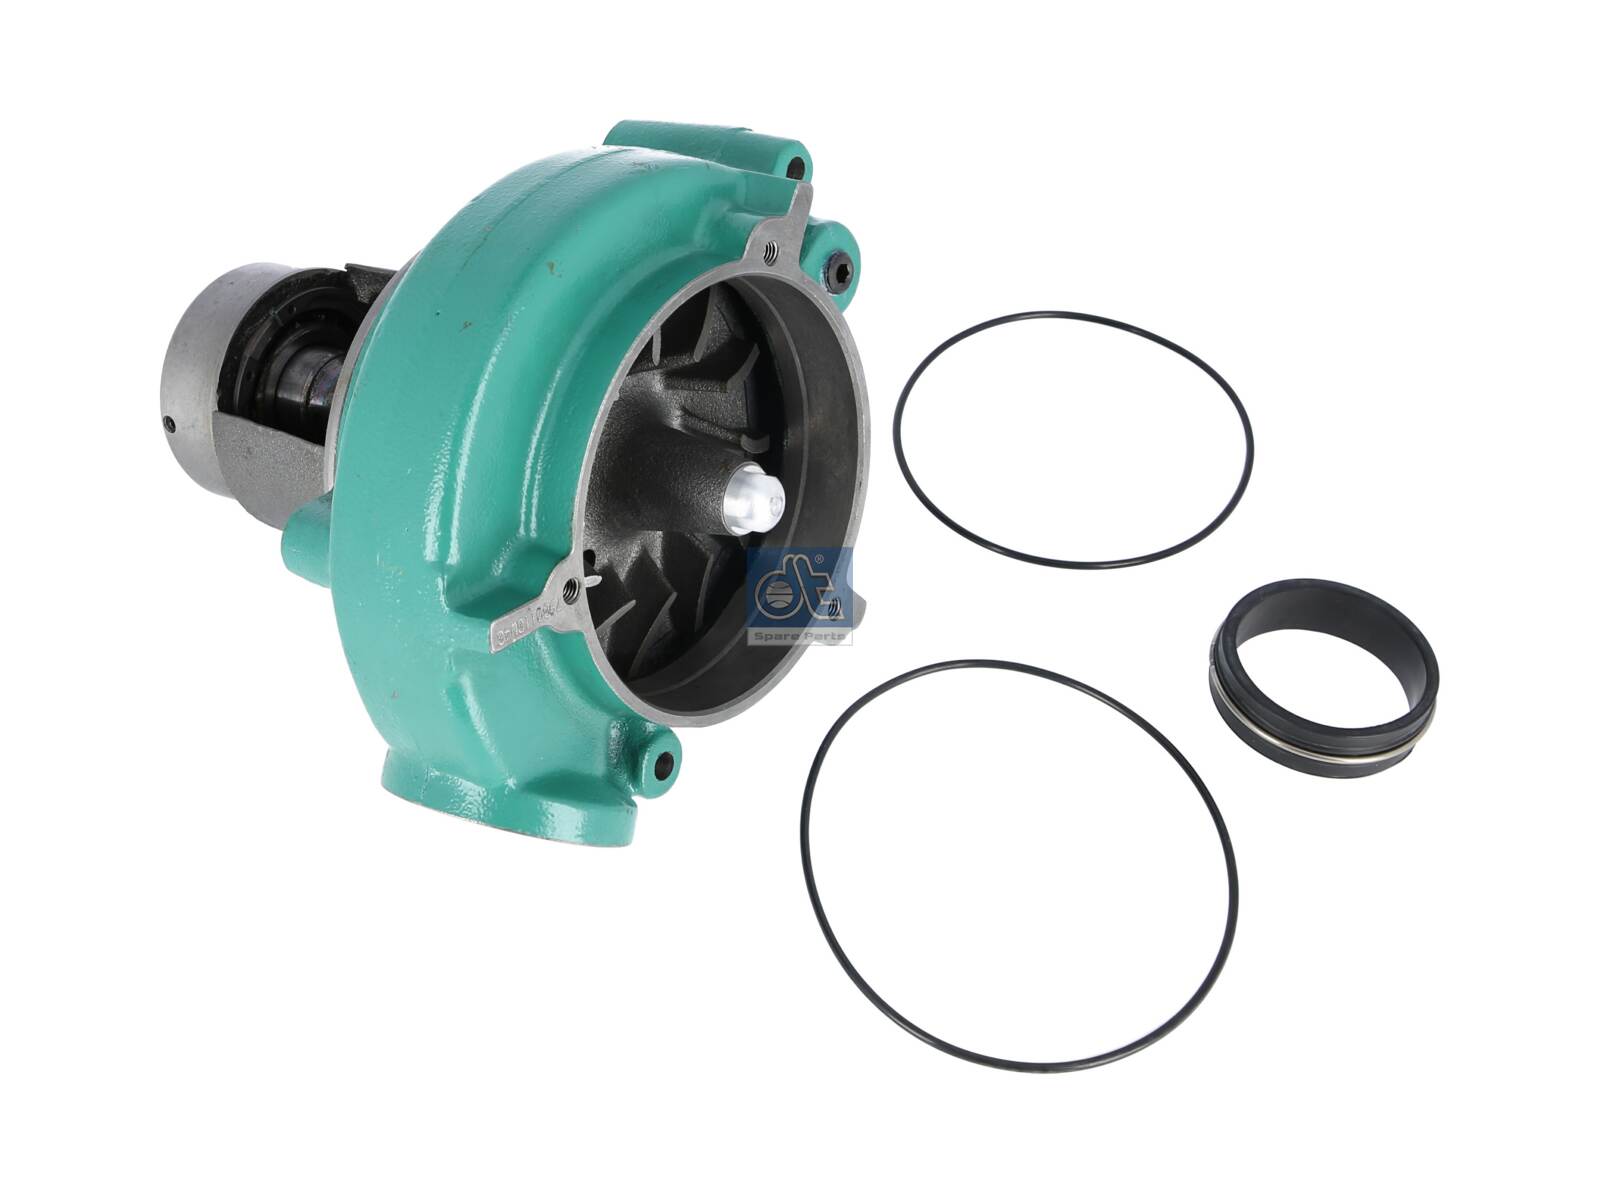 2.15269, Water Pump, engine cooling, DT Spare Parts, Volvo Truck F16/FH16 D16A* D16B* D16K* TD162*, 1543380, 1543480, 1543960, 1556330, 3803305, 8112620, 8112650, 8113116, 8149980, 01300011, 0319086, 032000D16000, 20160410010, 220879, 35022, 50005600, 5338149980, 57727, DP132, PA11219GGT, 033.169, 20.1604.10010, 35023, PA.11219.GGT, 033.169-01, 98200122, K01.0364, 0103112, 317.270, 980864